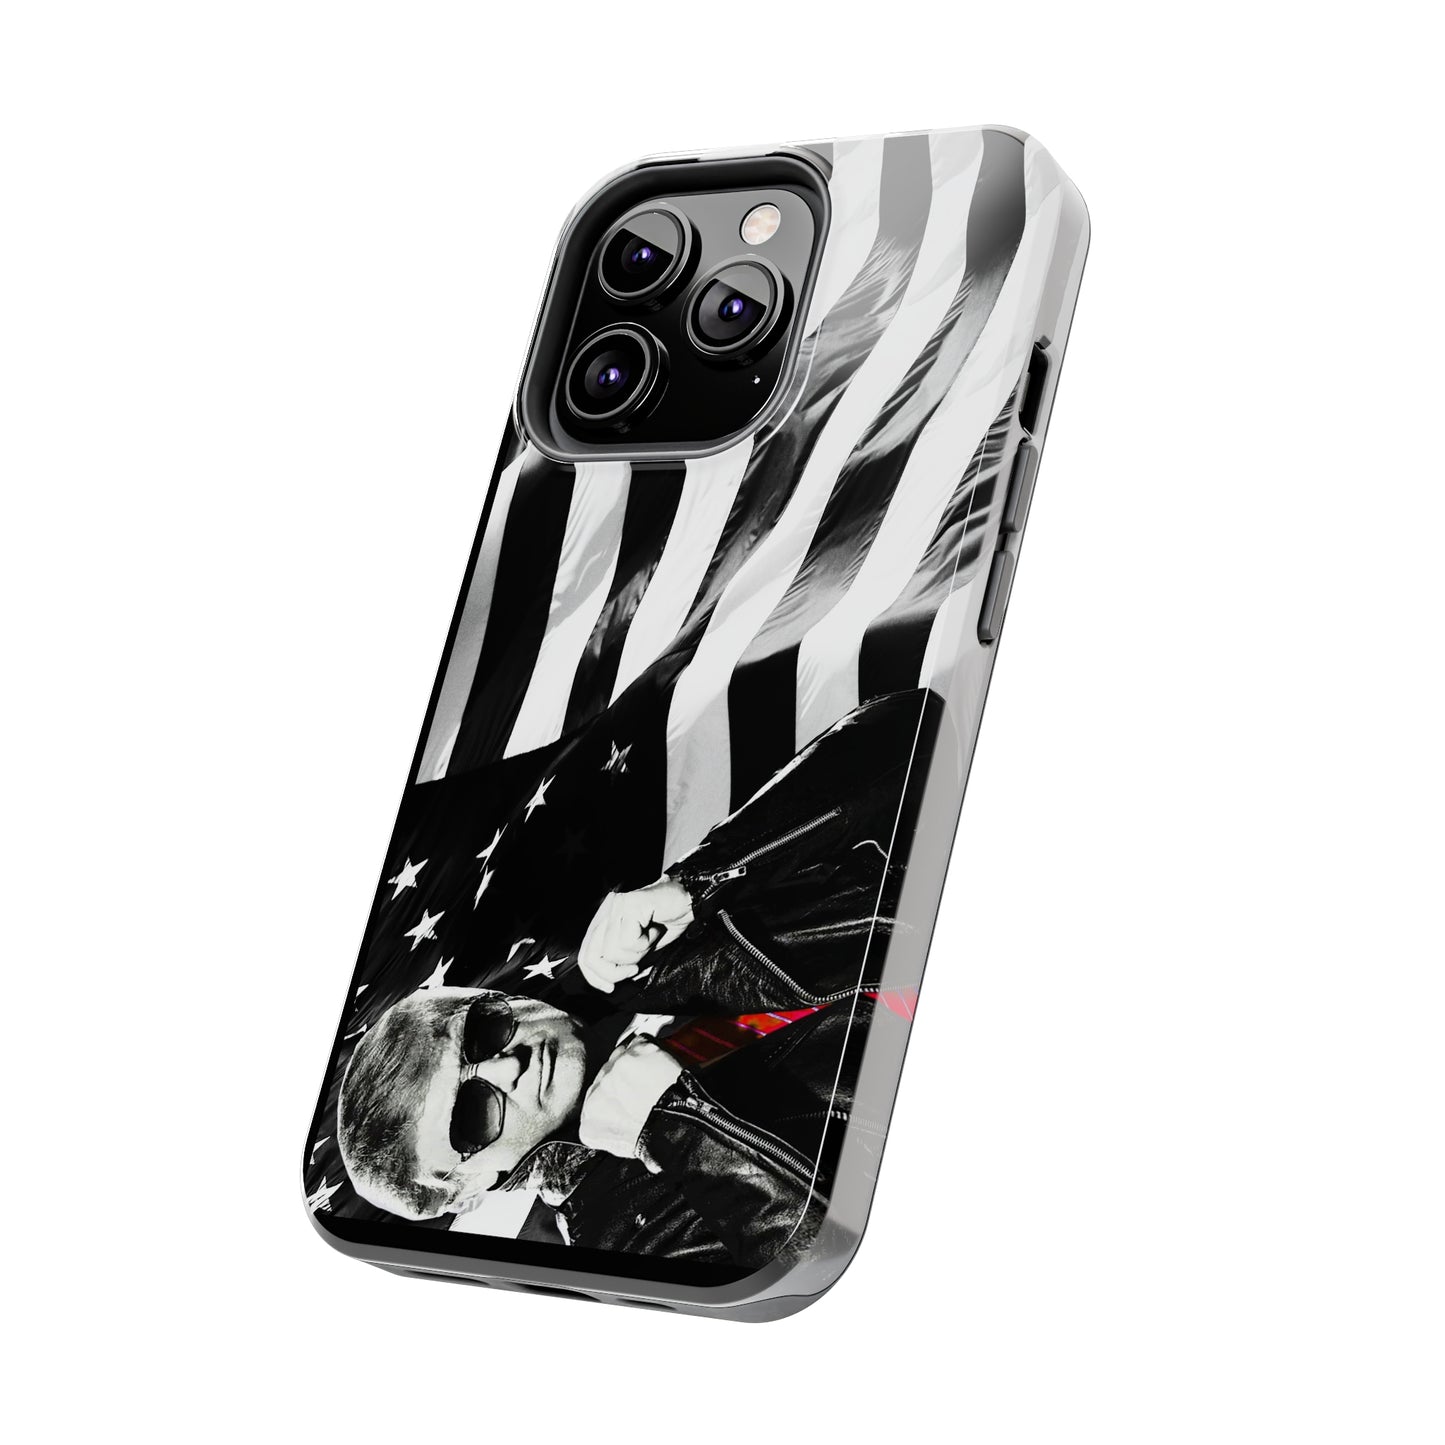 Cool Trump in Leather Jacket Black and White Apple iPhone Tough Phone Cases